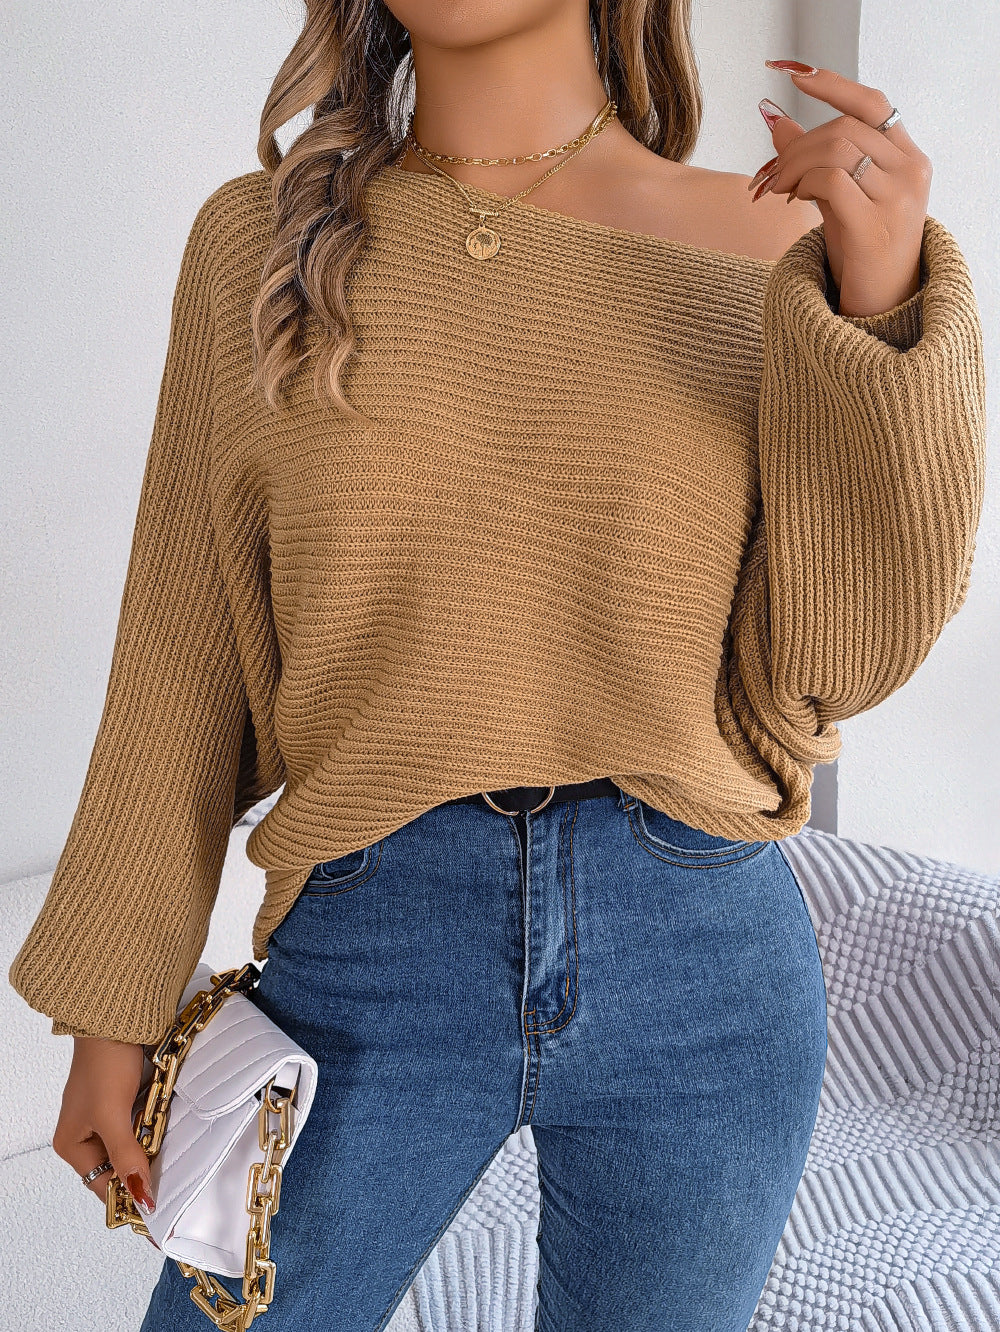 Autumn Winter Casual Loose Solid Color Batwing Sleeve Pullover Sweater Women Clothing